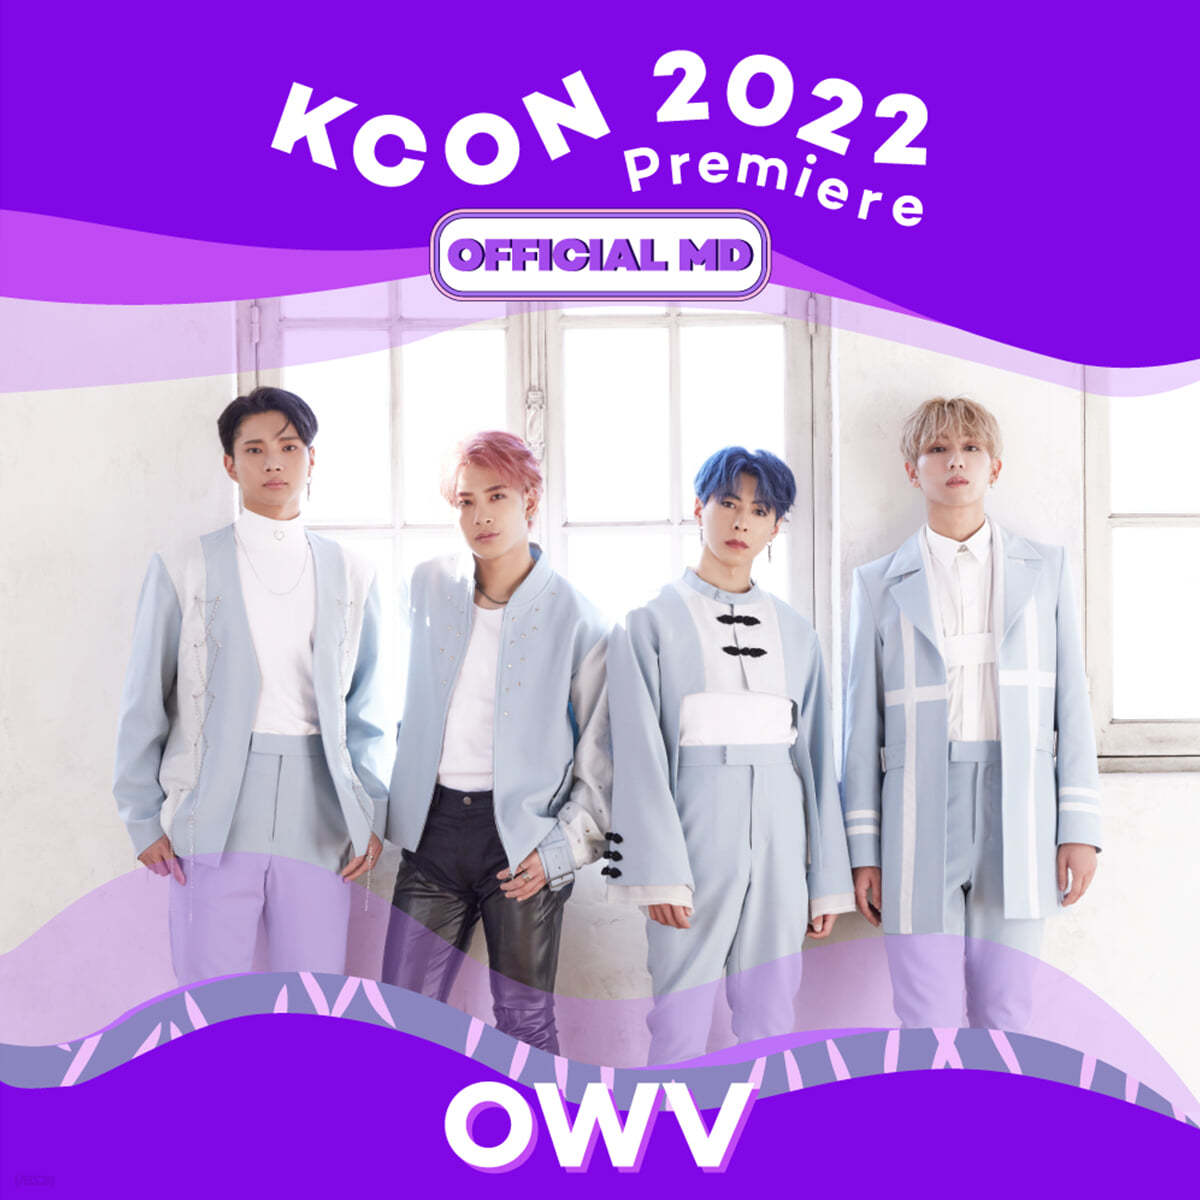 OWV (오우브) - KCON archive moment